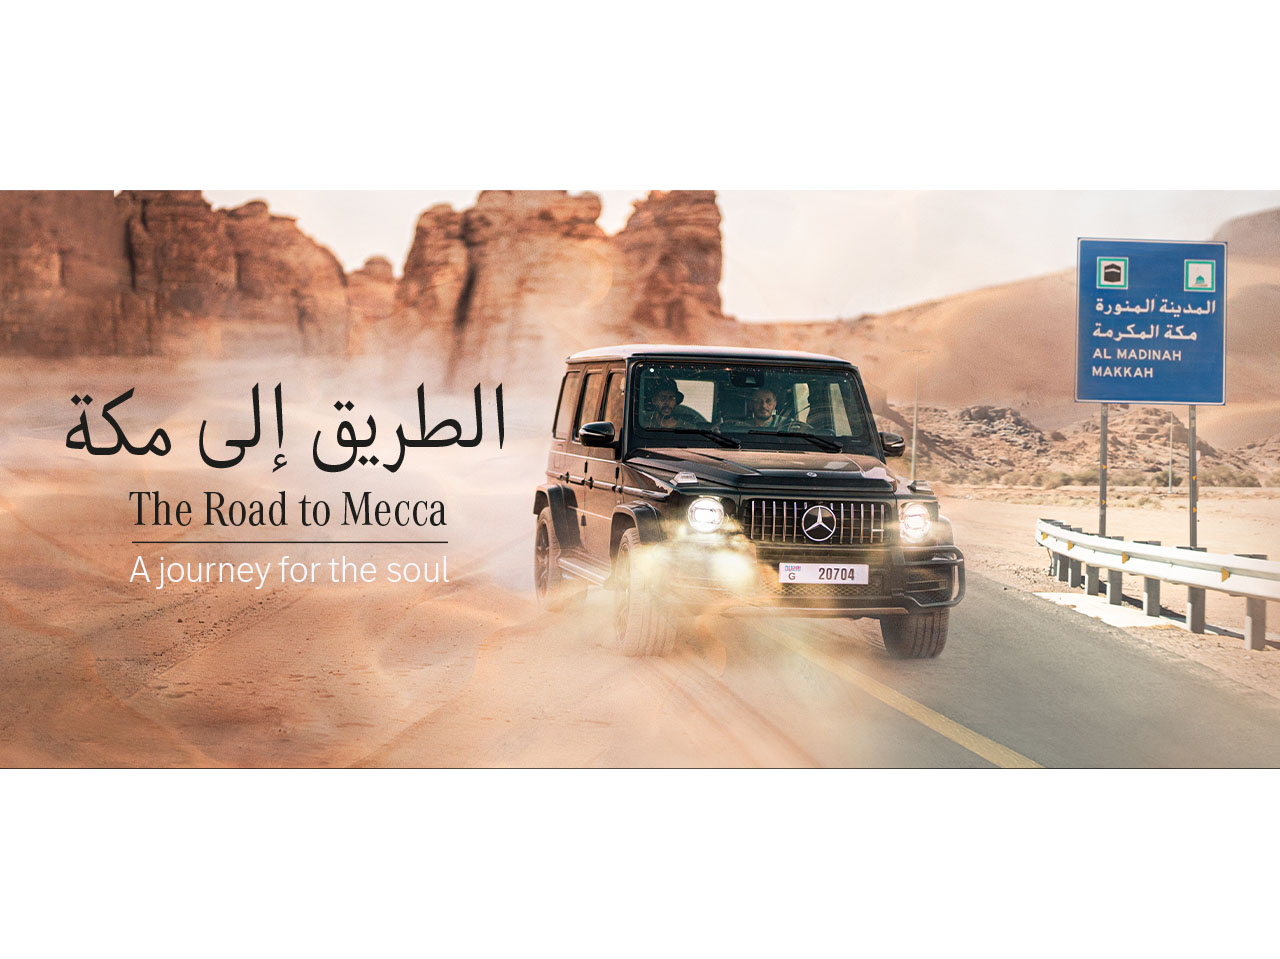 The Road to Mecca’, a docuseries and journey for the soul presented by Mercedes-Benz Middle East